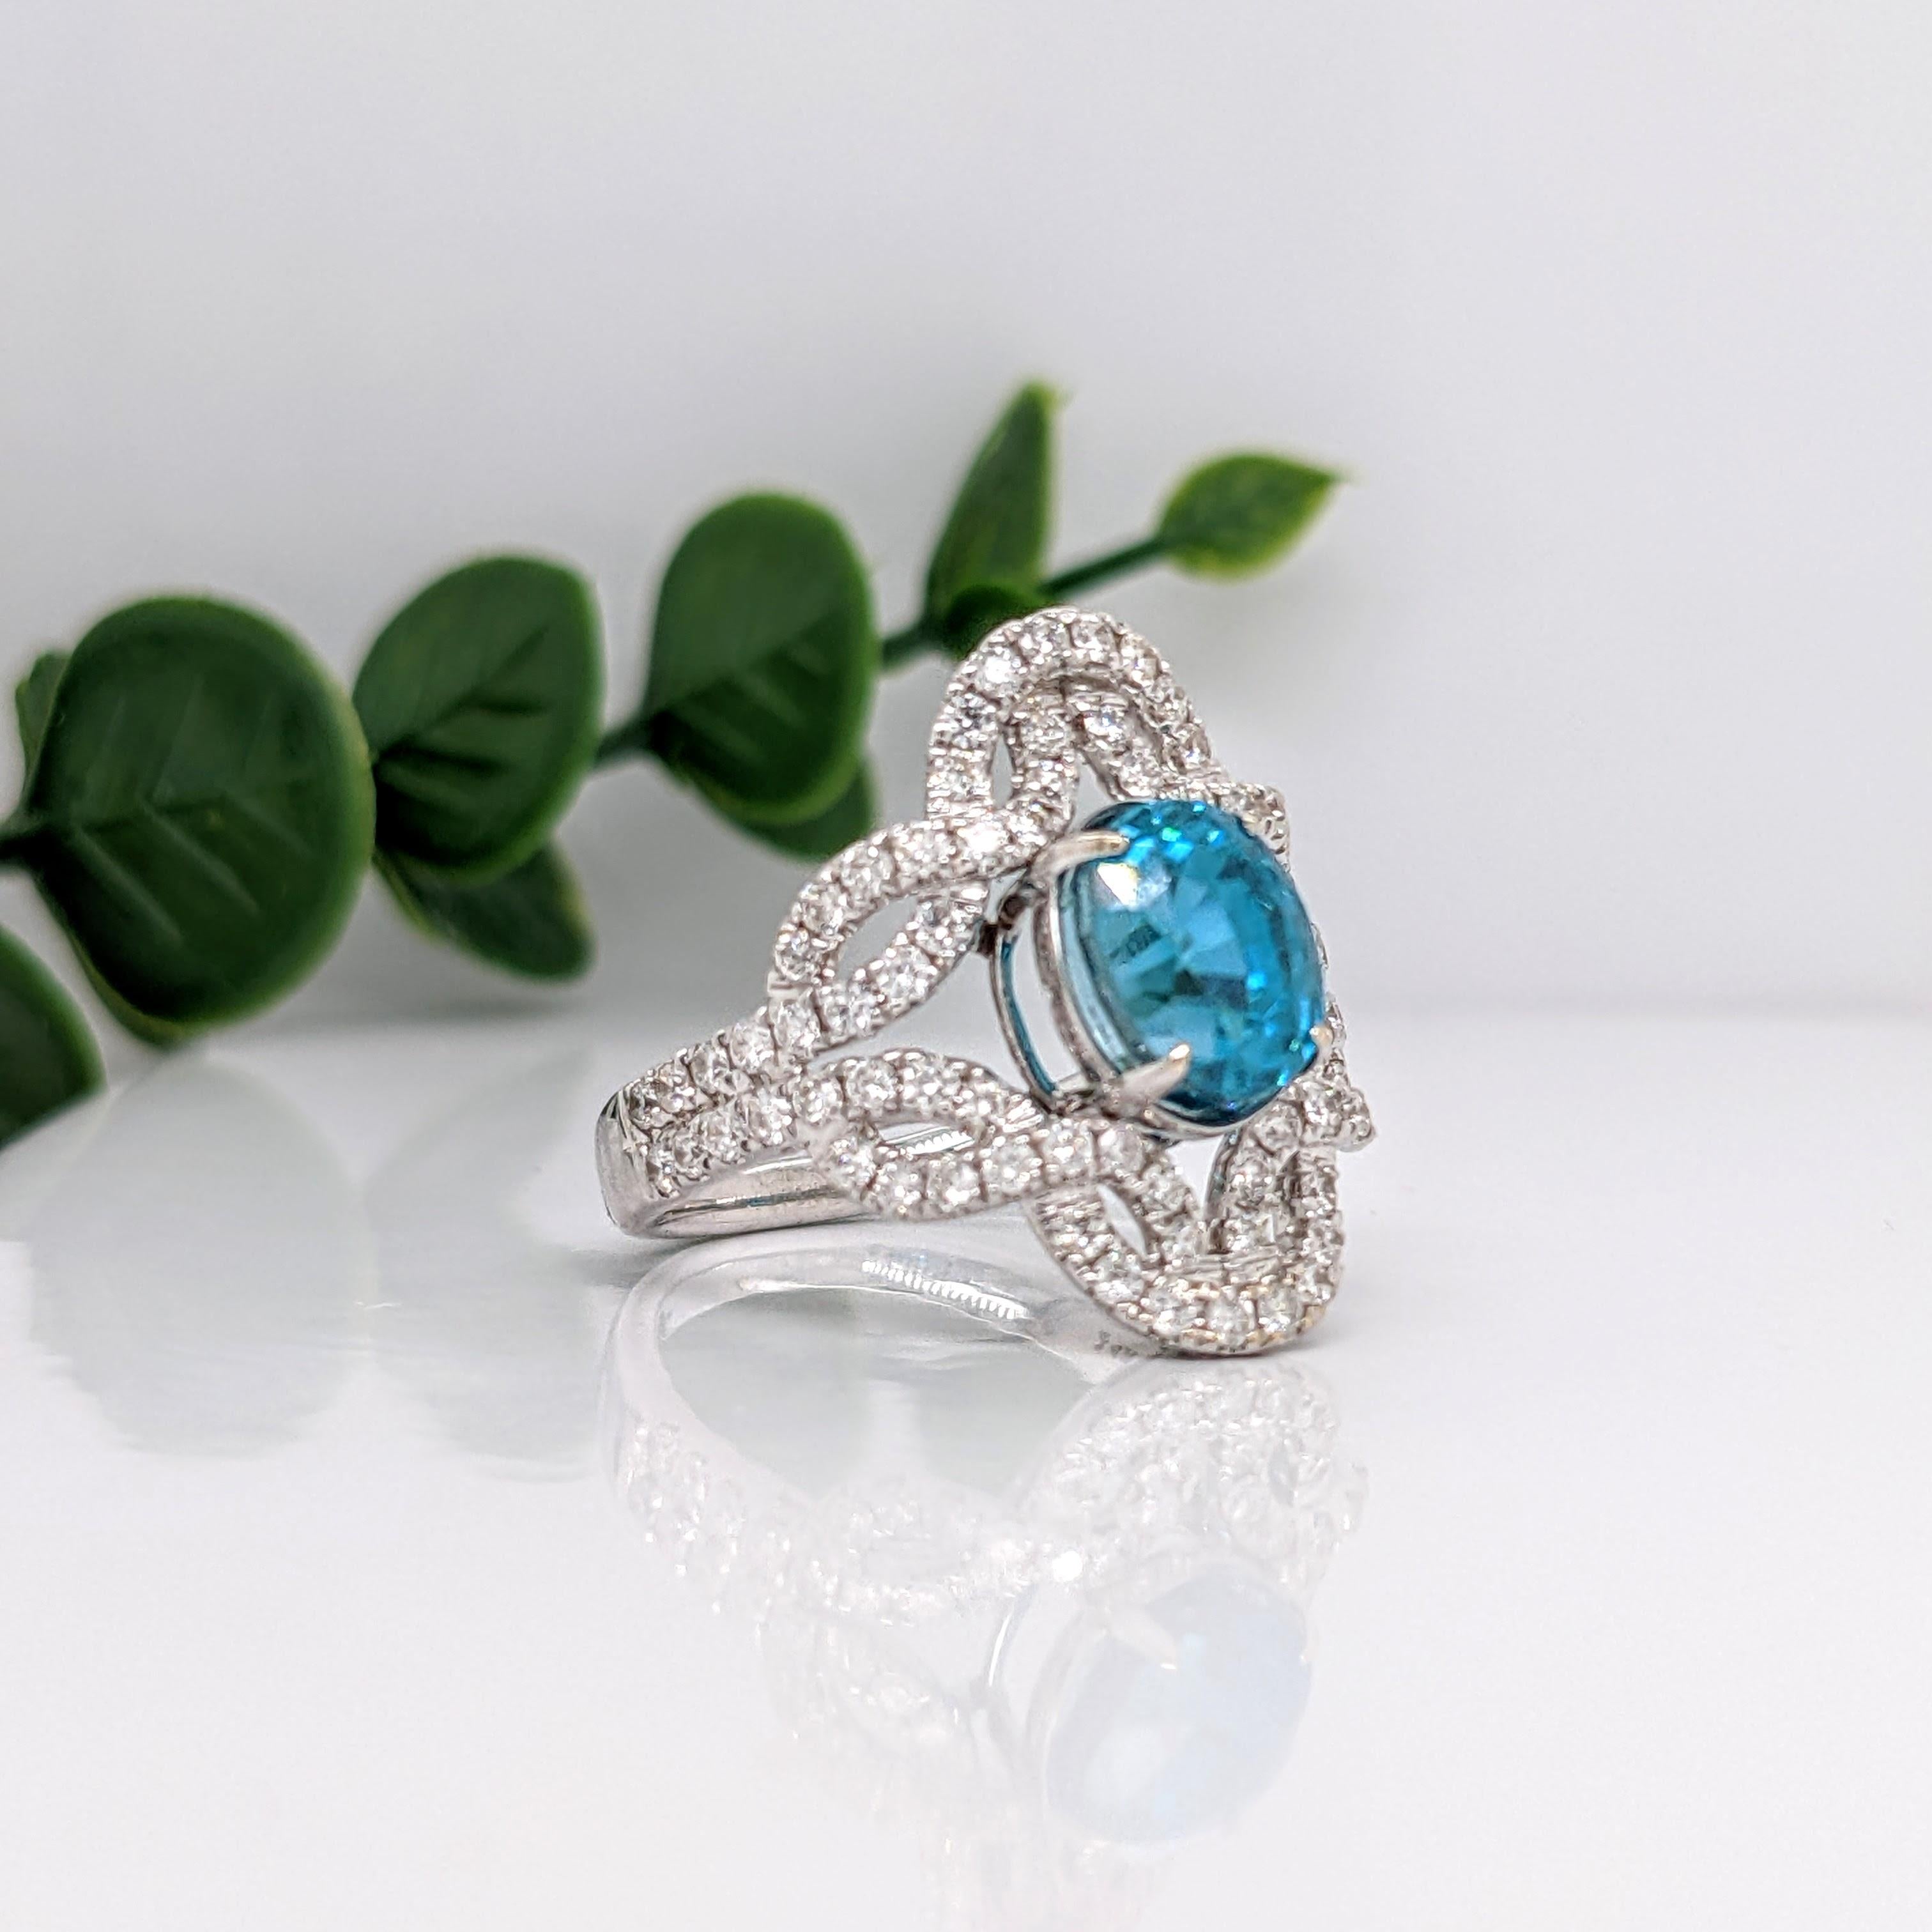 This embellished ring features a stunning vibrant 4.6ct oval blue zircon in a 14K white gold prong setting with pave diamond accents on a unique woven shank design. This ring makes for a stunning accessory to any look!  A fancy ring design perfect